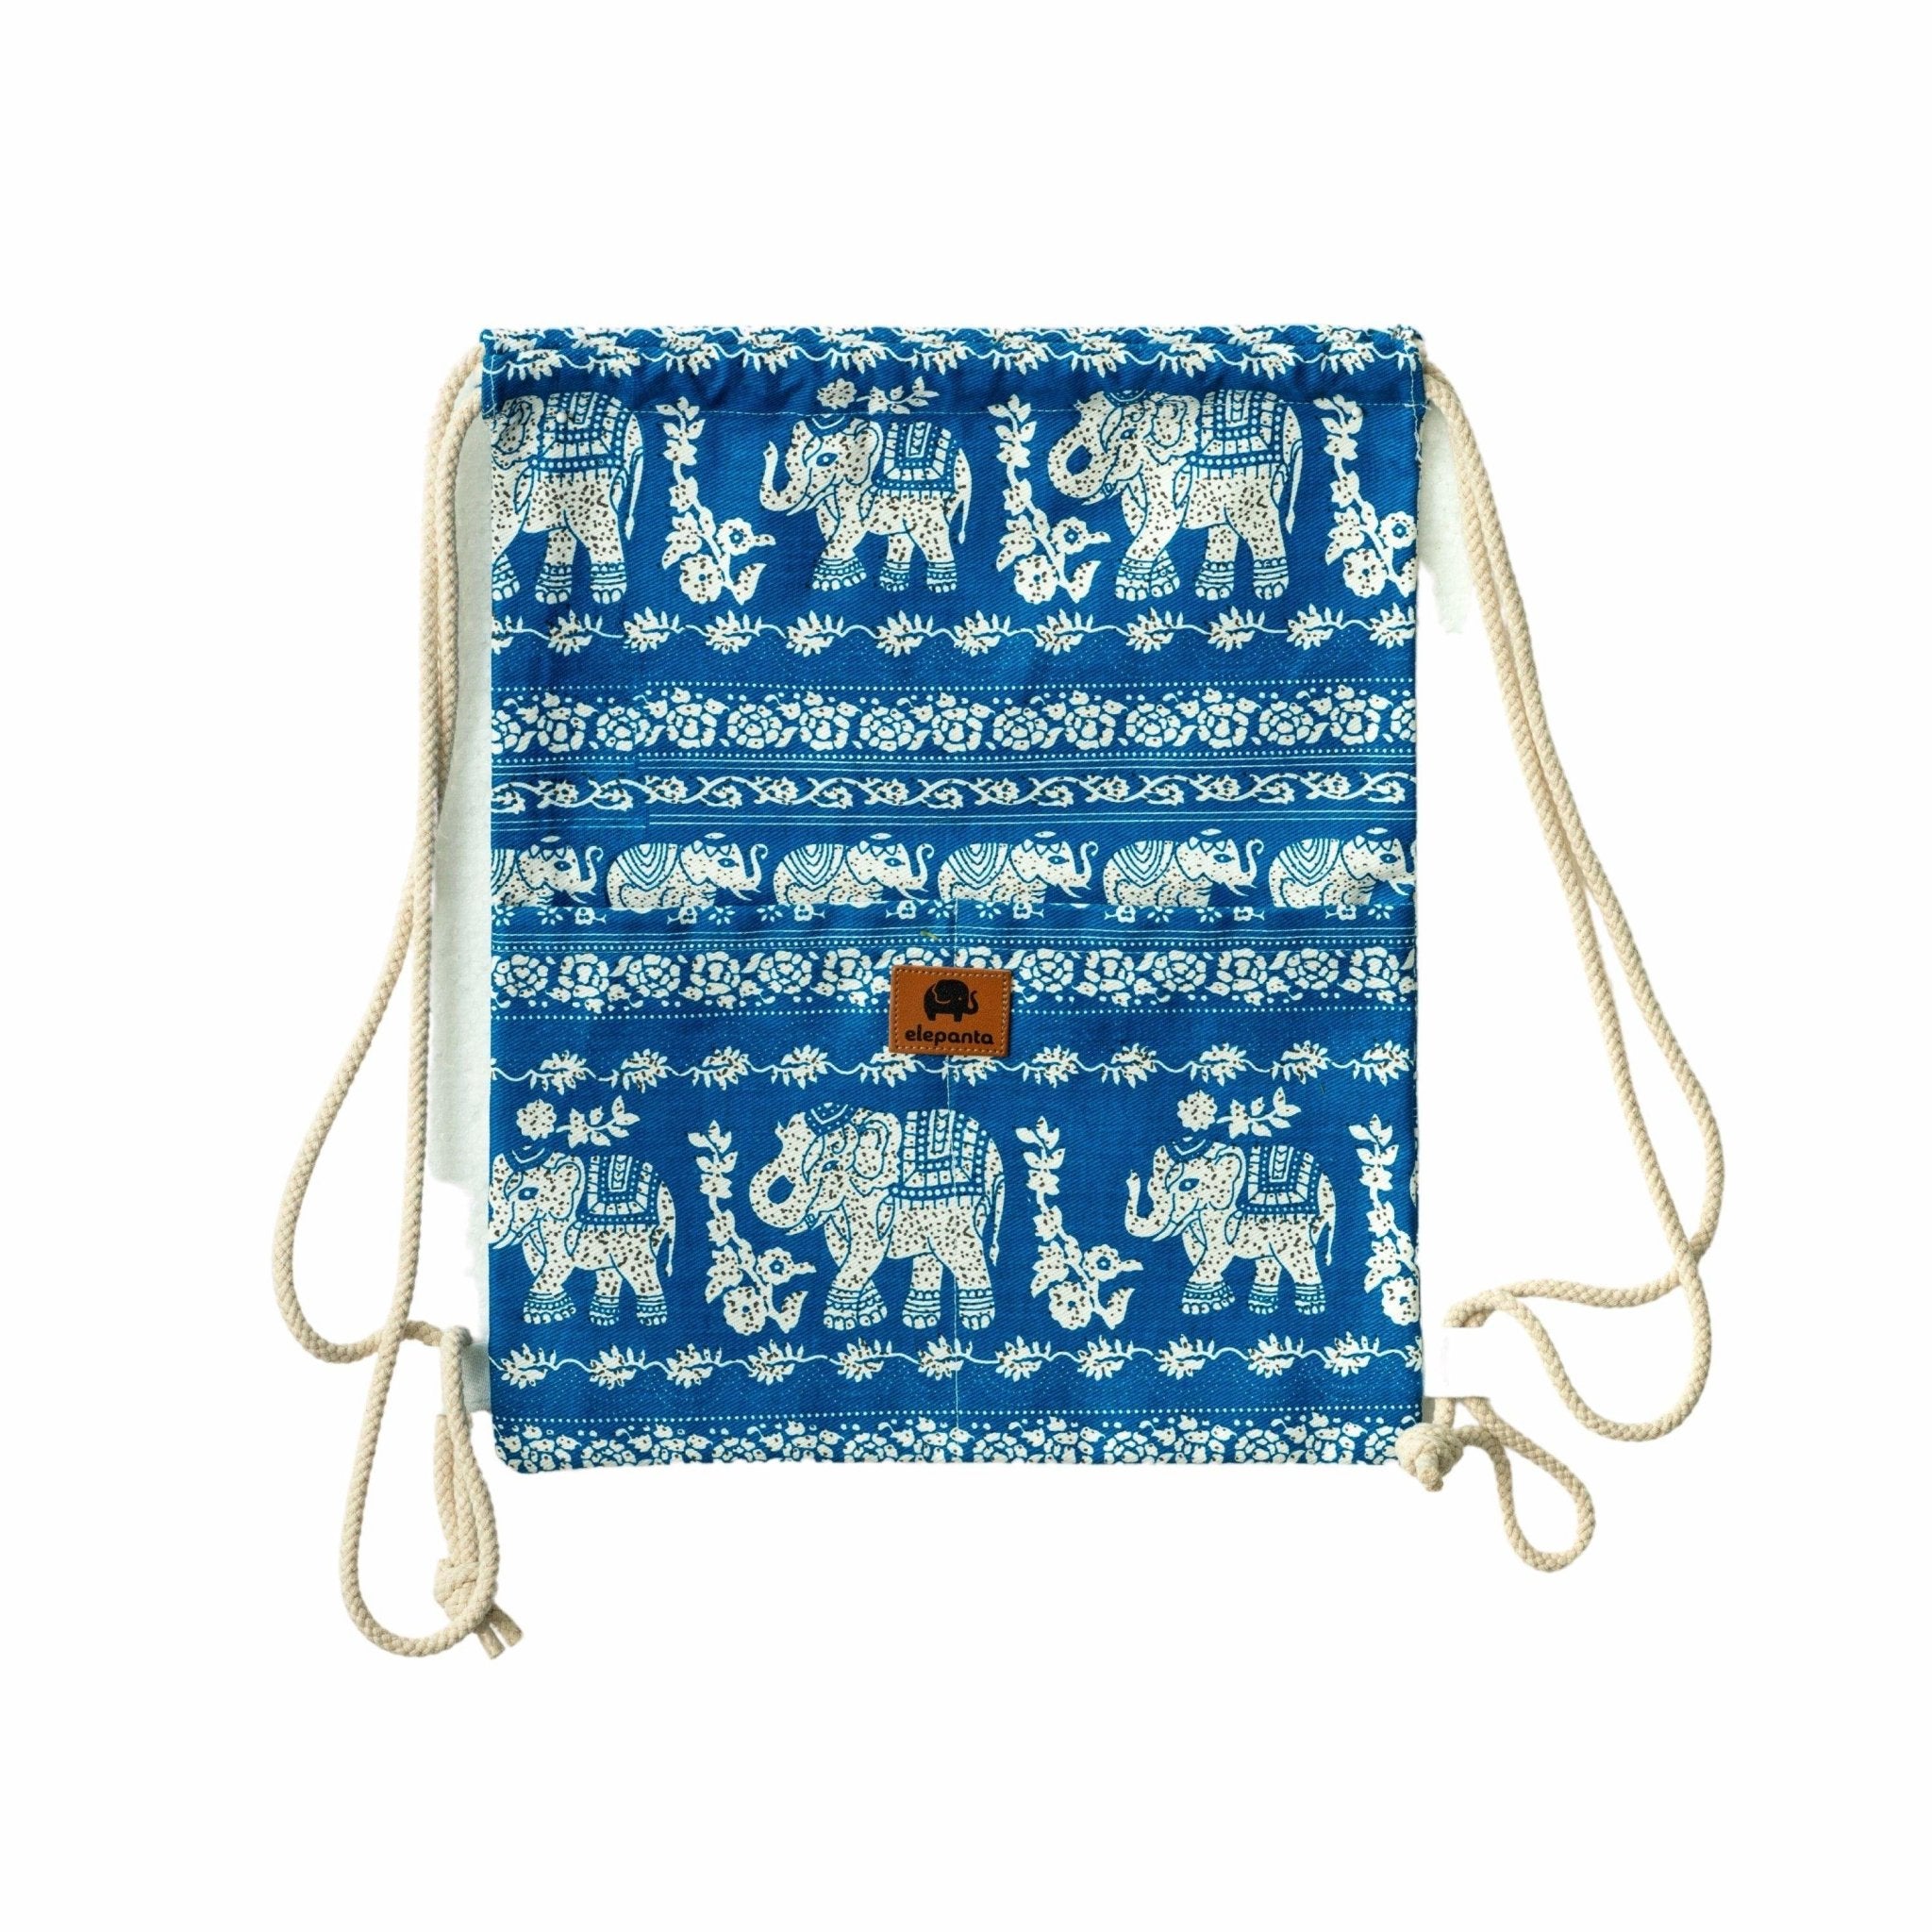 BALI DRAWSTRING BACKPACK Elepanta Backpacks - Buy Today Elephant Pants Jewelry And Bohemian Clothes Handmade In Thailand Help To Save The Elephants FairTrade And Vegan